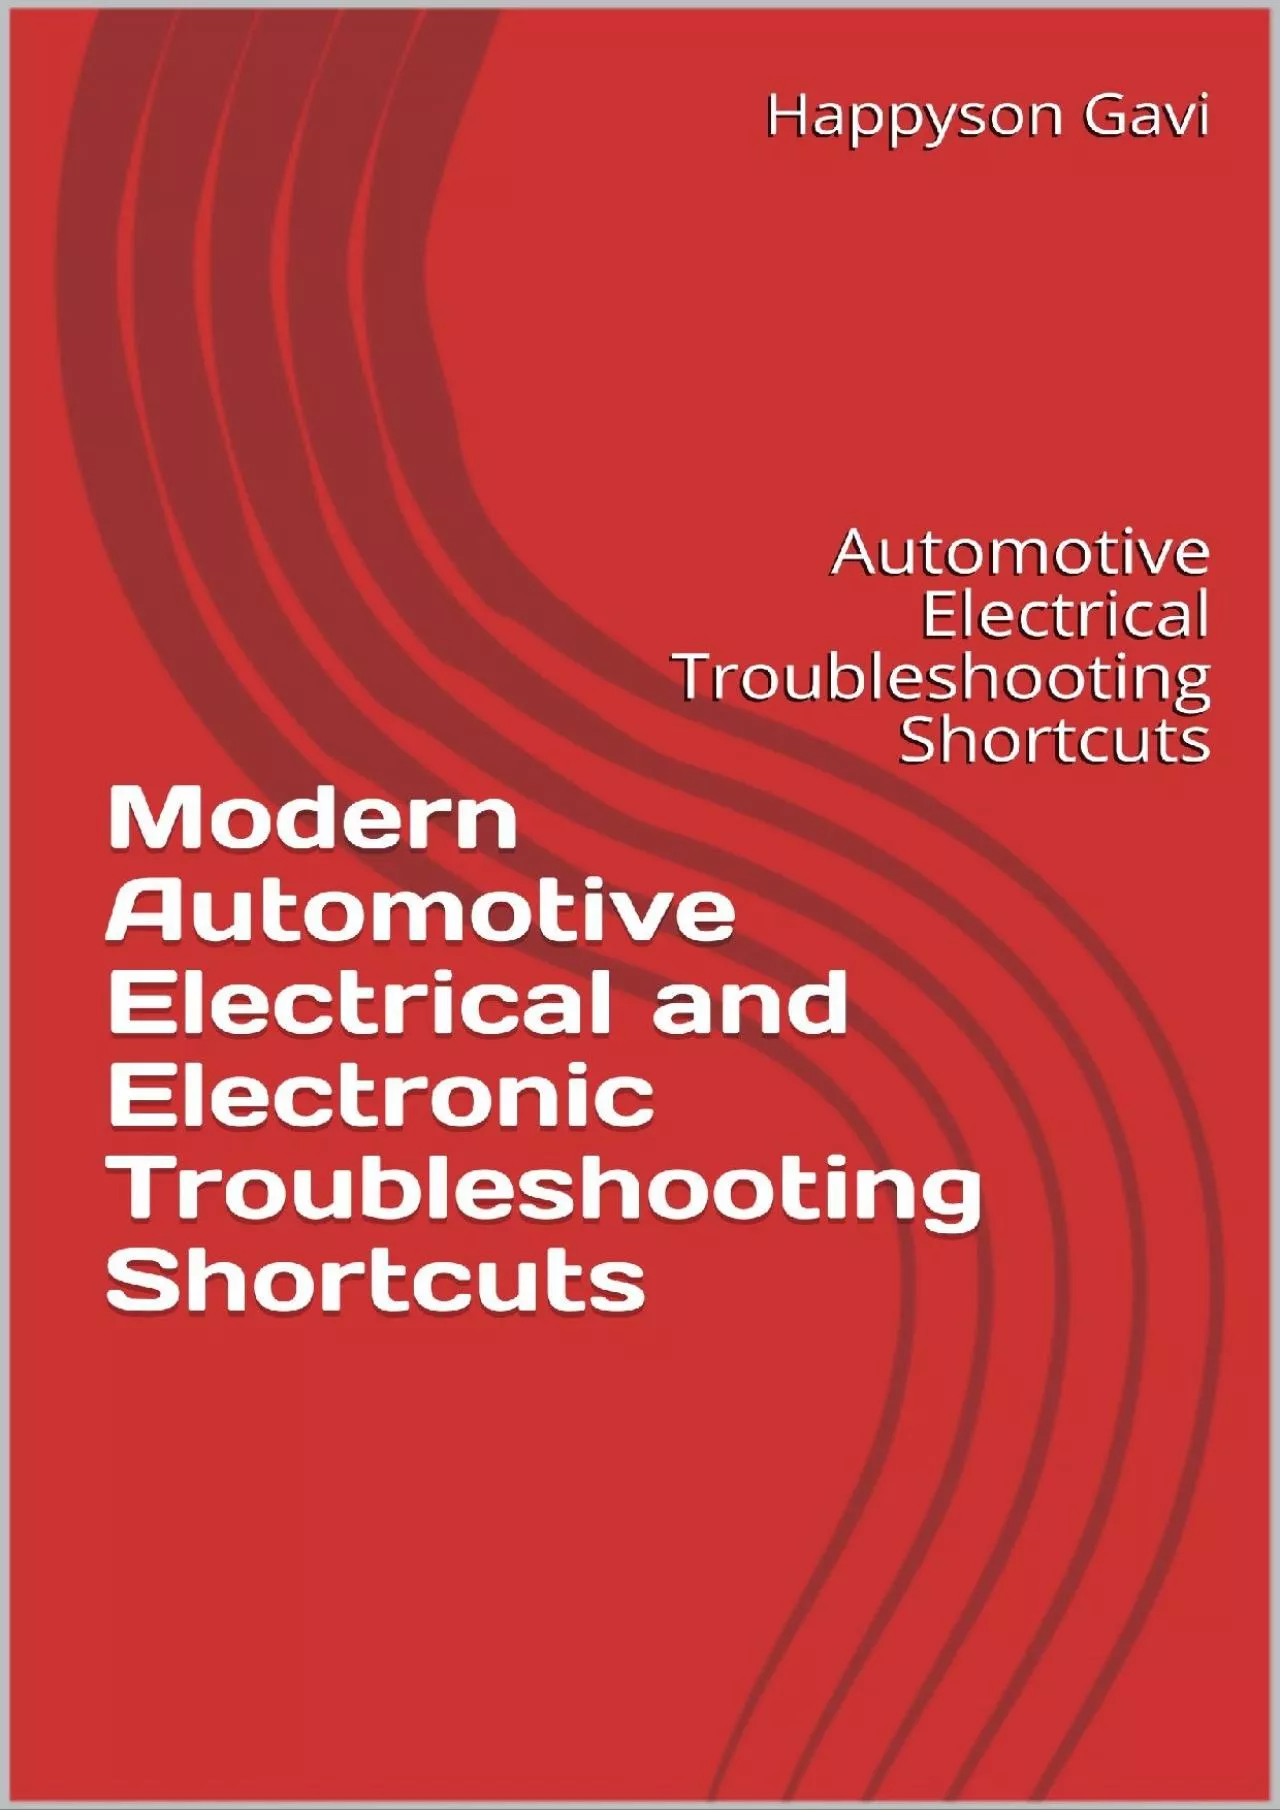 [DOWNLOAD] Modern Automotive Electrical and Electronic Troubleshooting Shortcuts: Automotive